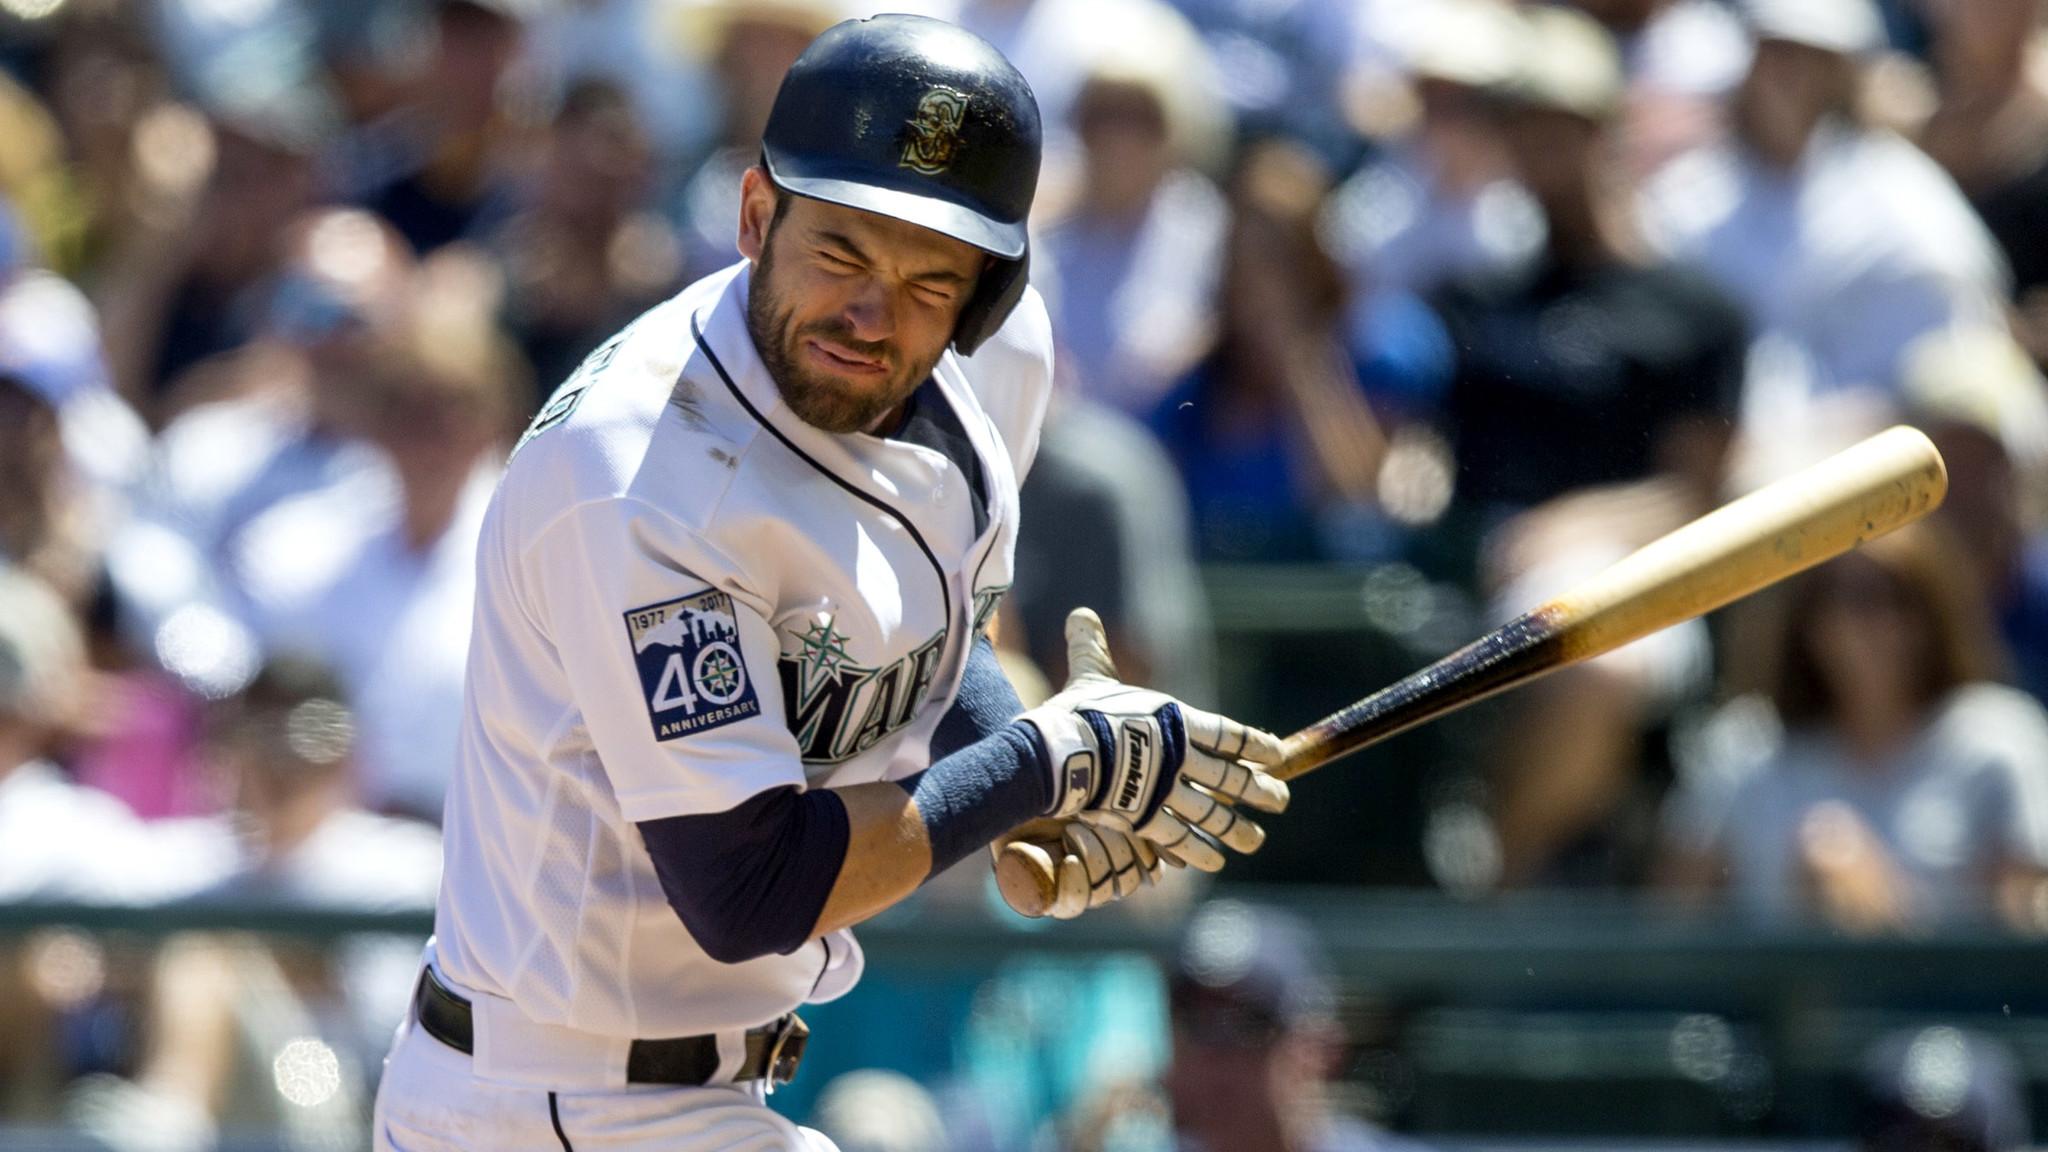 Mariners' Mitch Haniger hits in the face